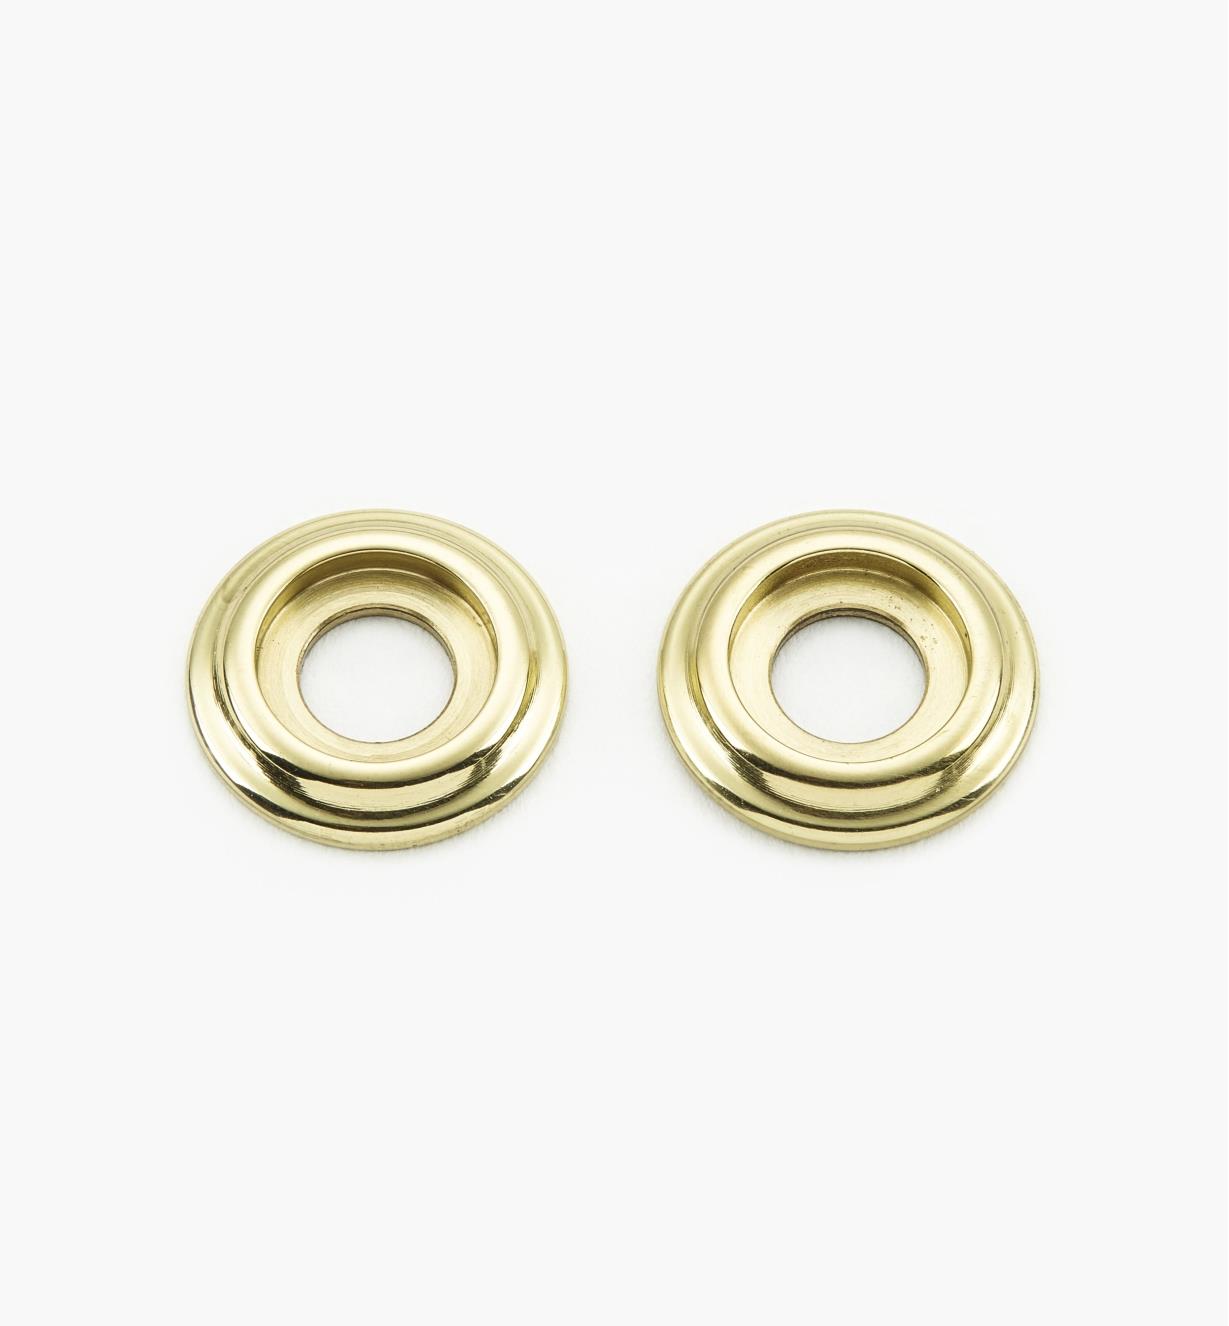 01W8005 - Polished Brass Suite - Spacers/Escutcheon Plates